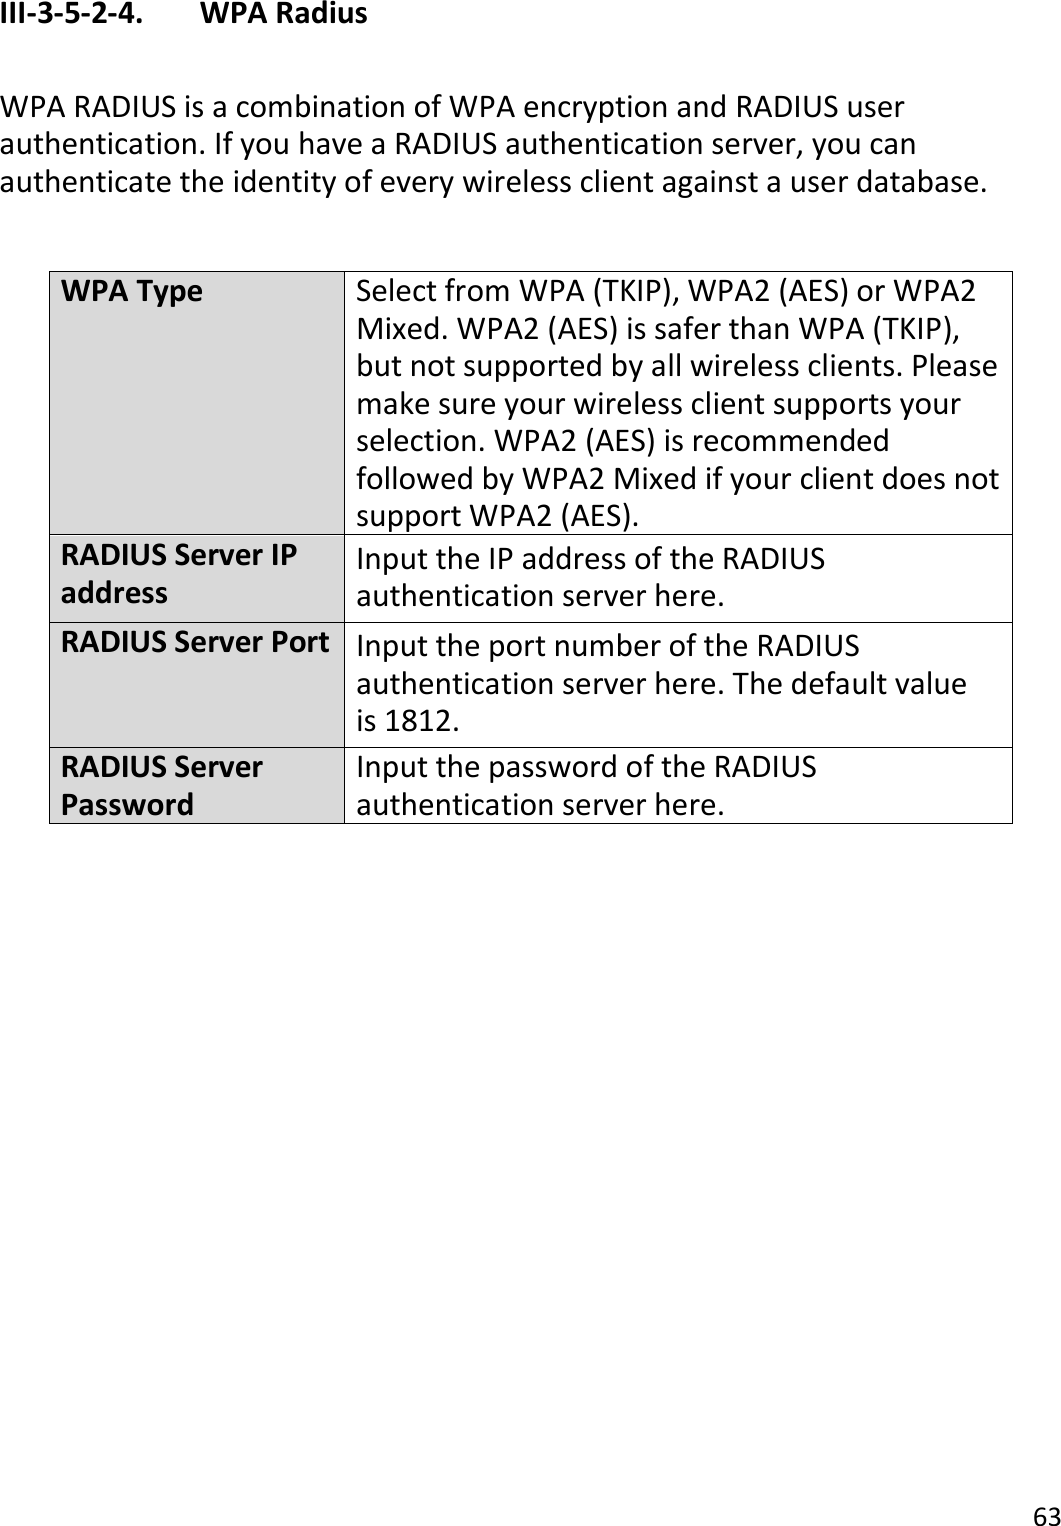 63  III-3-5-2-4.    WPA Radius  WPA RADIUS is a combination of WPA encryption and RADIUS user authentication. If you have a RADIUS authentication server, you can authenticate the identity of every wireless client against a user database.   WPA Type Select from WPA (TKIP), WPA2 (AES) or WPA2 Mixed. WPA2 (AES) is safer than WPA (TKIP), but not supported by all wireless clients. Please make sure your wireless client supports your selection. WPA2 (AES) is recommended followed by WPA2 Mixed if your client does not support WPA2 (AES). RADIUS Server IP address Input the IP address of the RADIUS authentication server here. RADIUS Server Port Input the port number of the RADIUS authentication server here. The default value is 1812. RADIUS Server Password Input the password of the RADIUS authentication server here.     